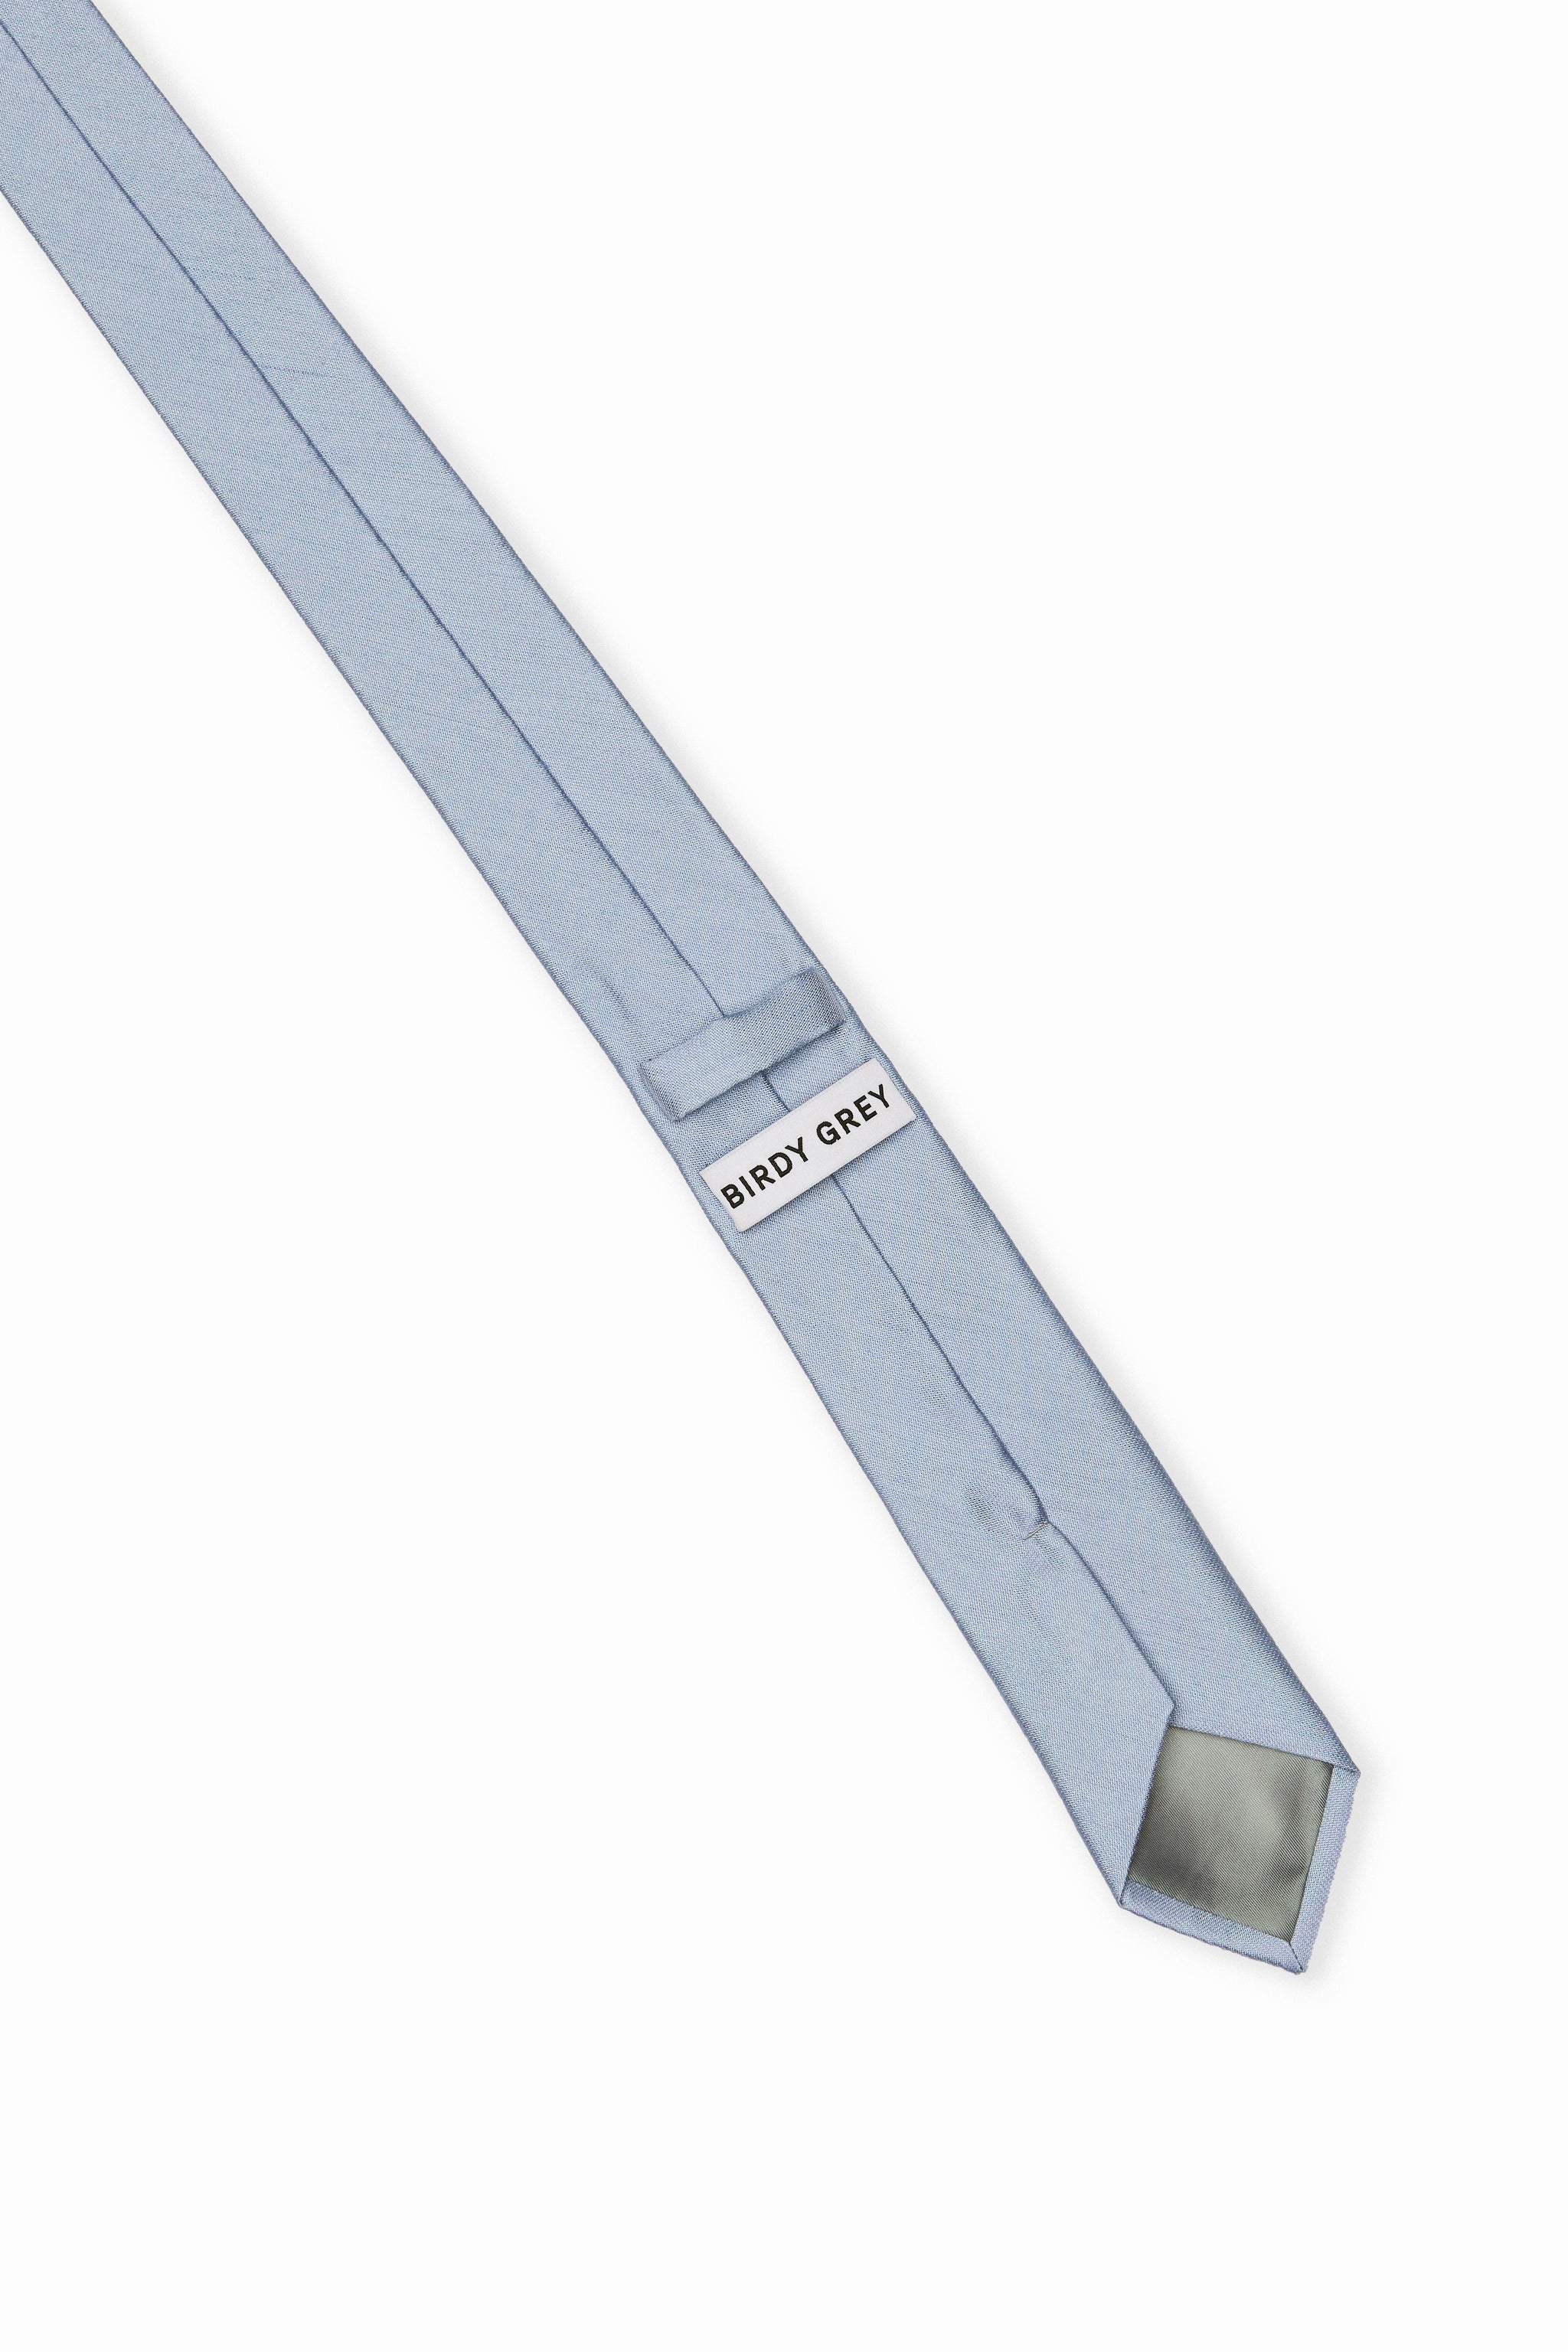 Elevated back view of the Simon Necktie in dusty blue fully extended on a white background showing the necktie satin lining in light grey, a keeper loop to tuck the necktie end, and a label that reads, 